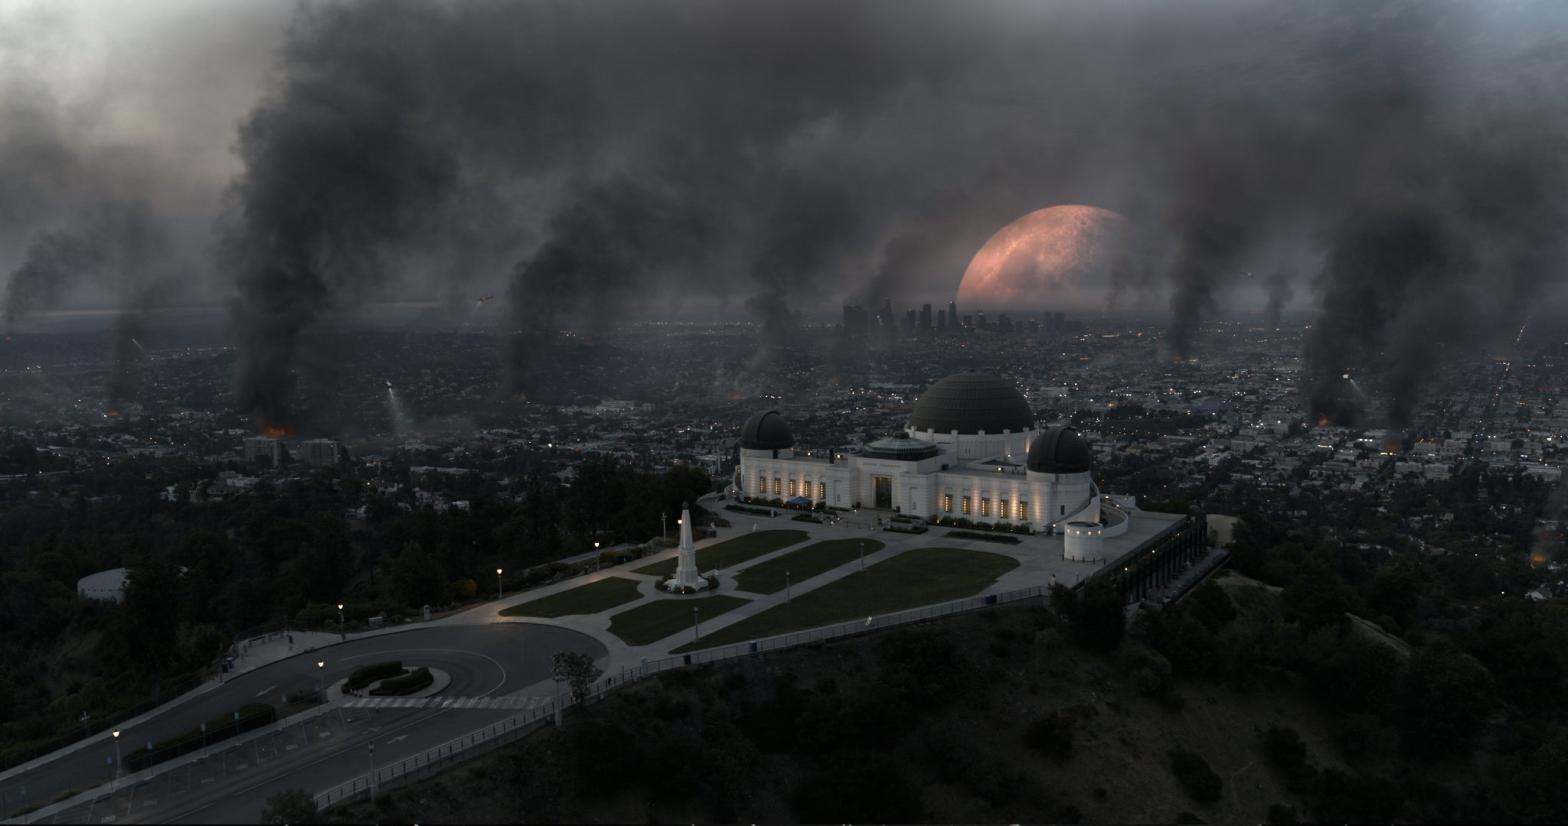 moon movies: The moon looms over Los Angeles in a scene from Moonfall. (Image: Lionsgate)